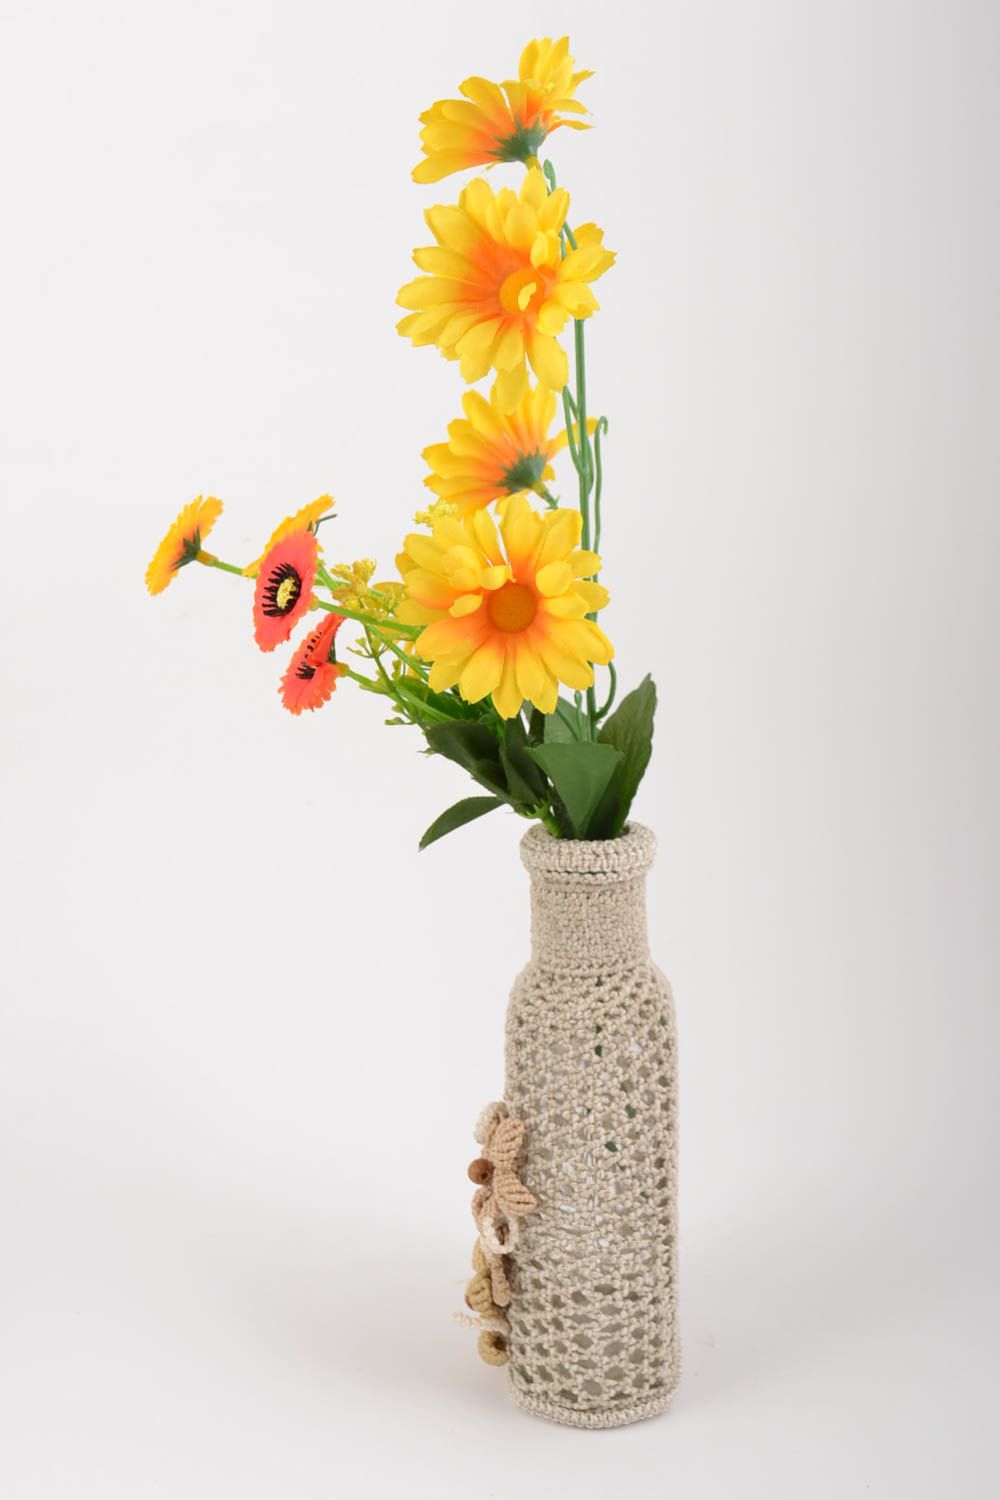 3 inch macrame decorated glass floral vase for home décor 0,66 lb photo 5